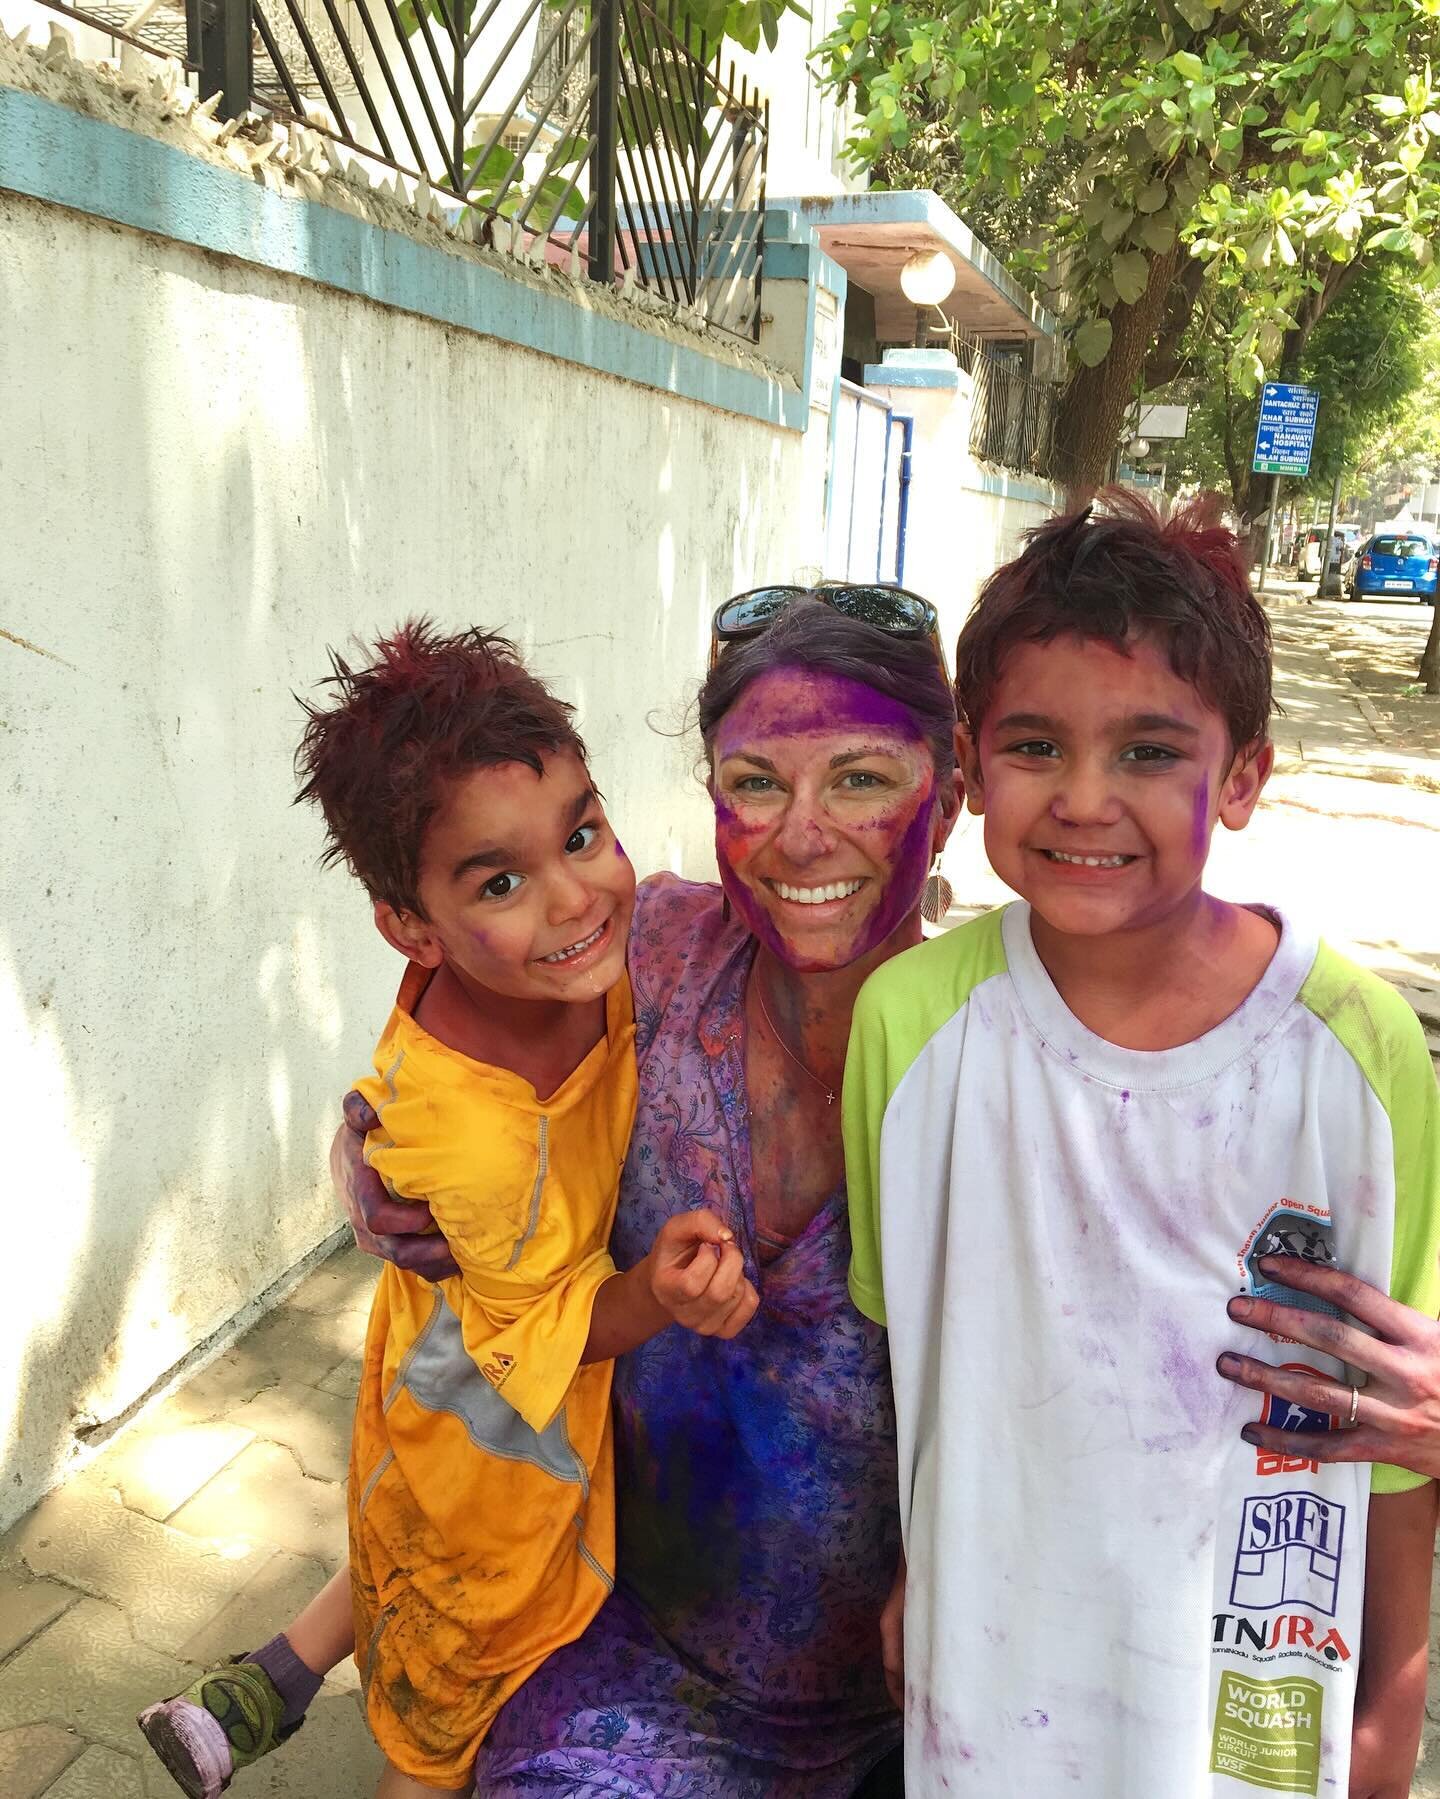 Holi, Mumbai 2017. A day to celebrate the triumph of good over evil, of divine love and the rebirth that spring brings. It&rsquo;s no exaggeration to say that this was the most memorable and meaningful trip we&rsquo;ve ever taken. Mumbai, Jaipur, Uda